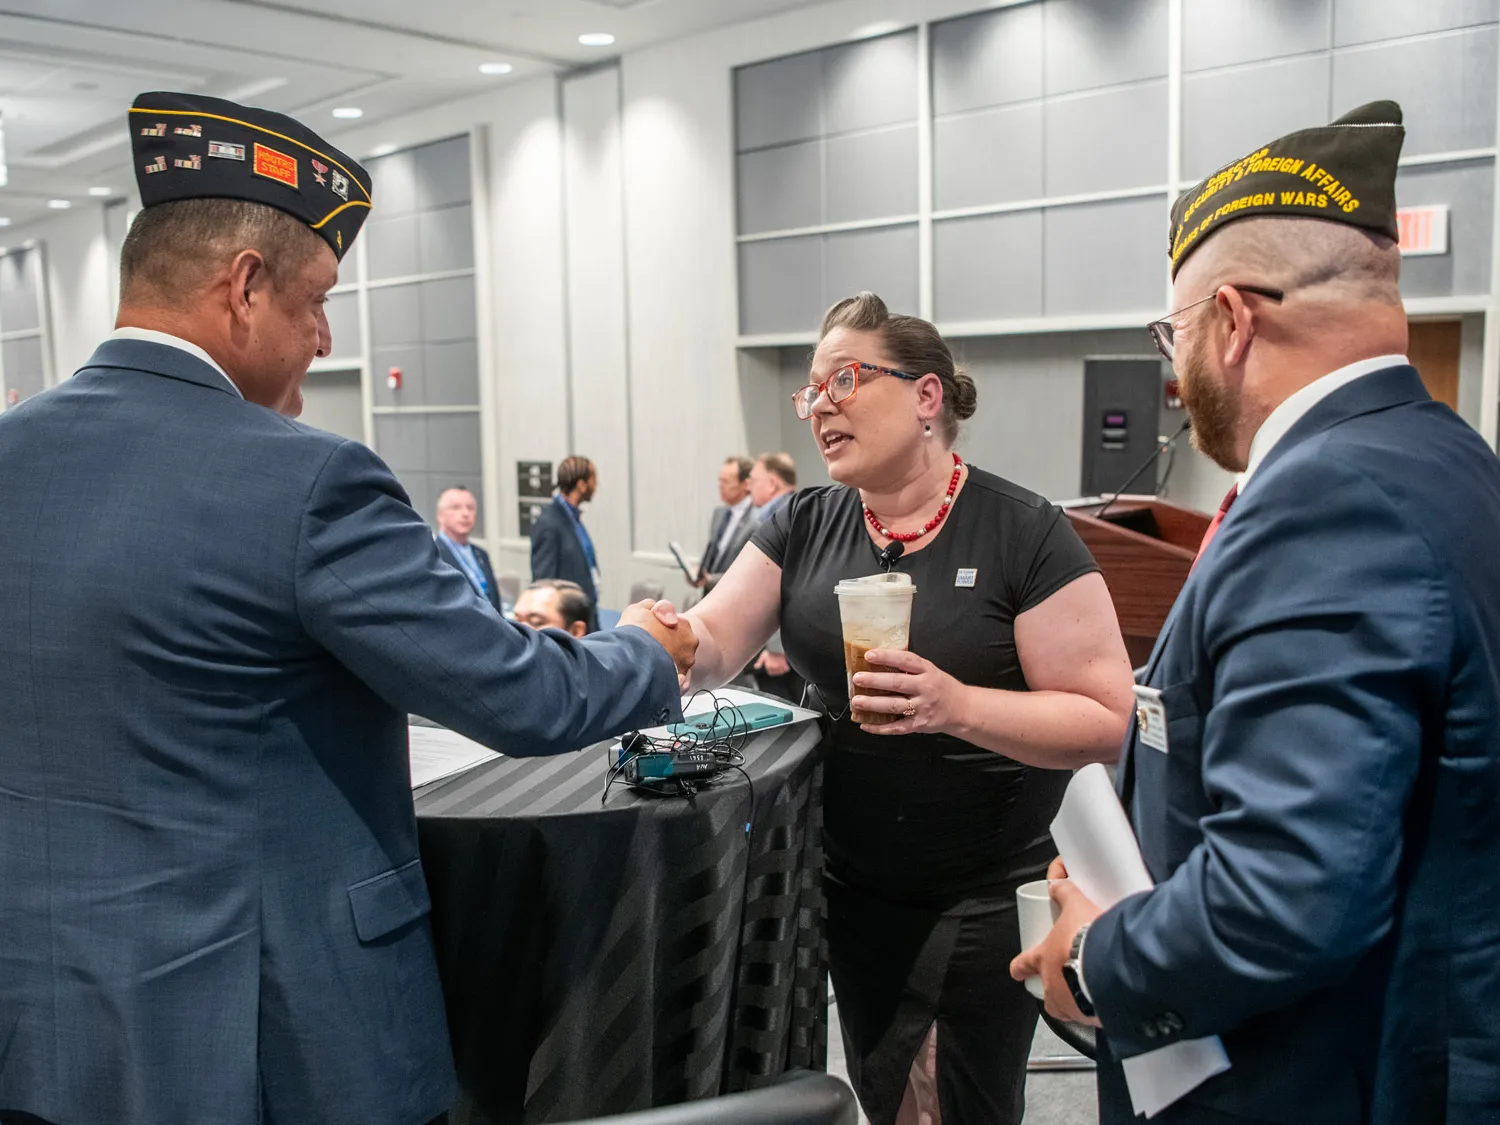 At a table on a small stage, Gretchen Klingler, a white woman with a style reminiscent of the 1940s, leans across a table to shake hands with a white man wearing an American Legion uniform cap and a suit. They’re making eye contact, and next to them smiling is a white man in a suit, this one with a VFW uniform cap. 